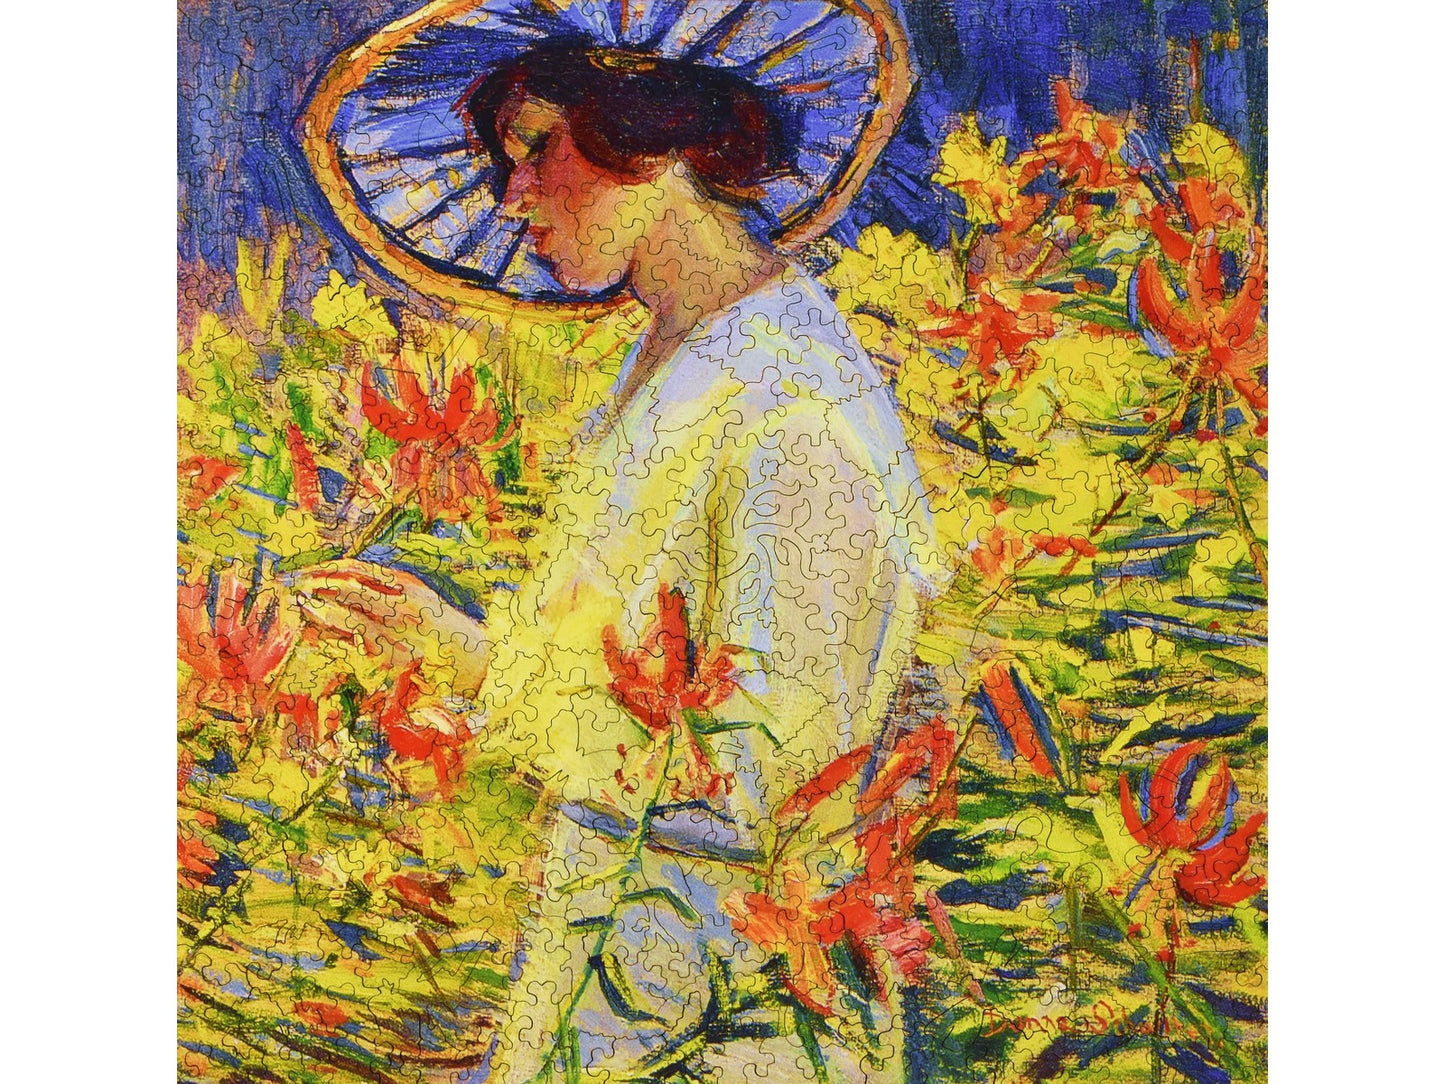 The front of the puzzle, In the Garden, which shows a woman in a garden full of flowers.